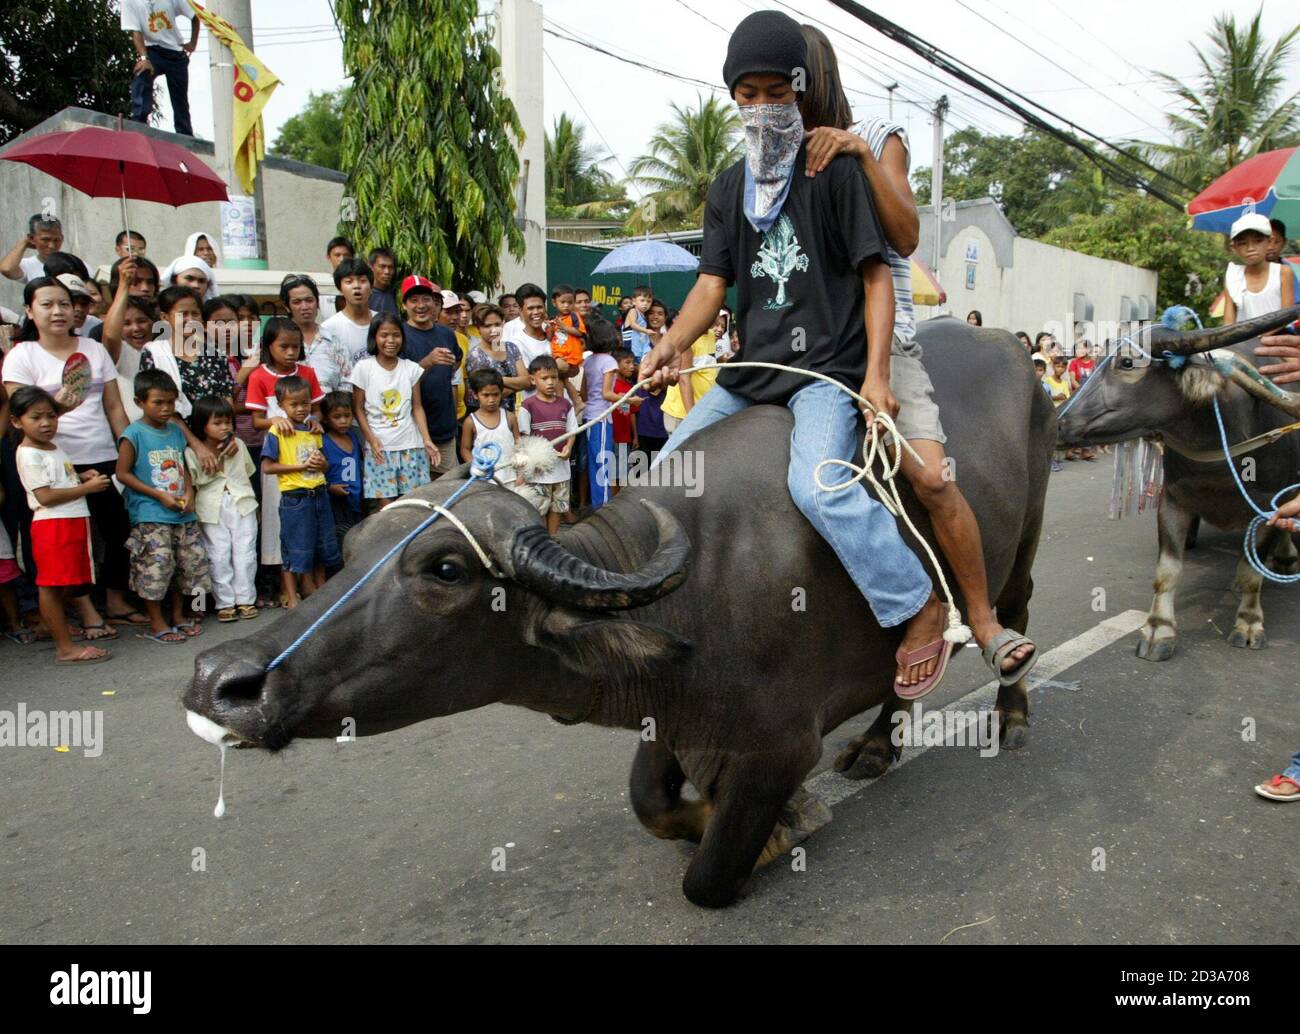 buffalo-riding Filipino farmers make their animals kneel during a parade in in Bulacan province, north of Manila May 14, 2003. The farmers perform ritual as a gesture of thanks